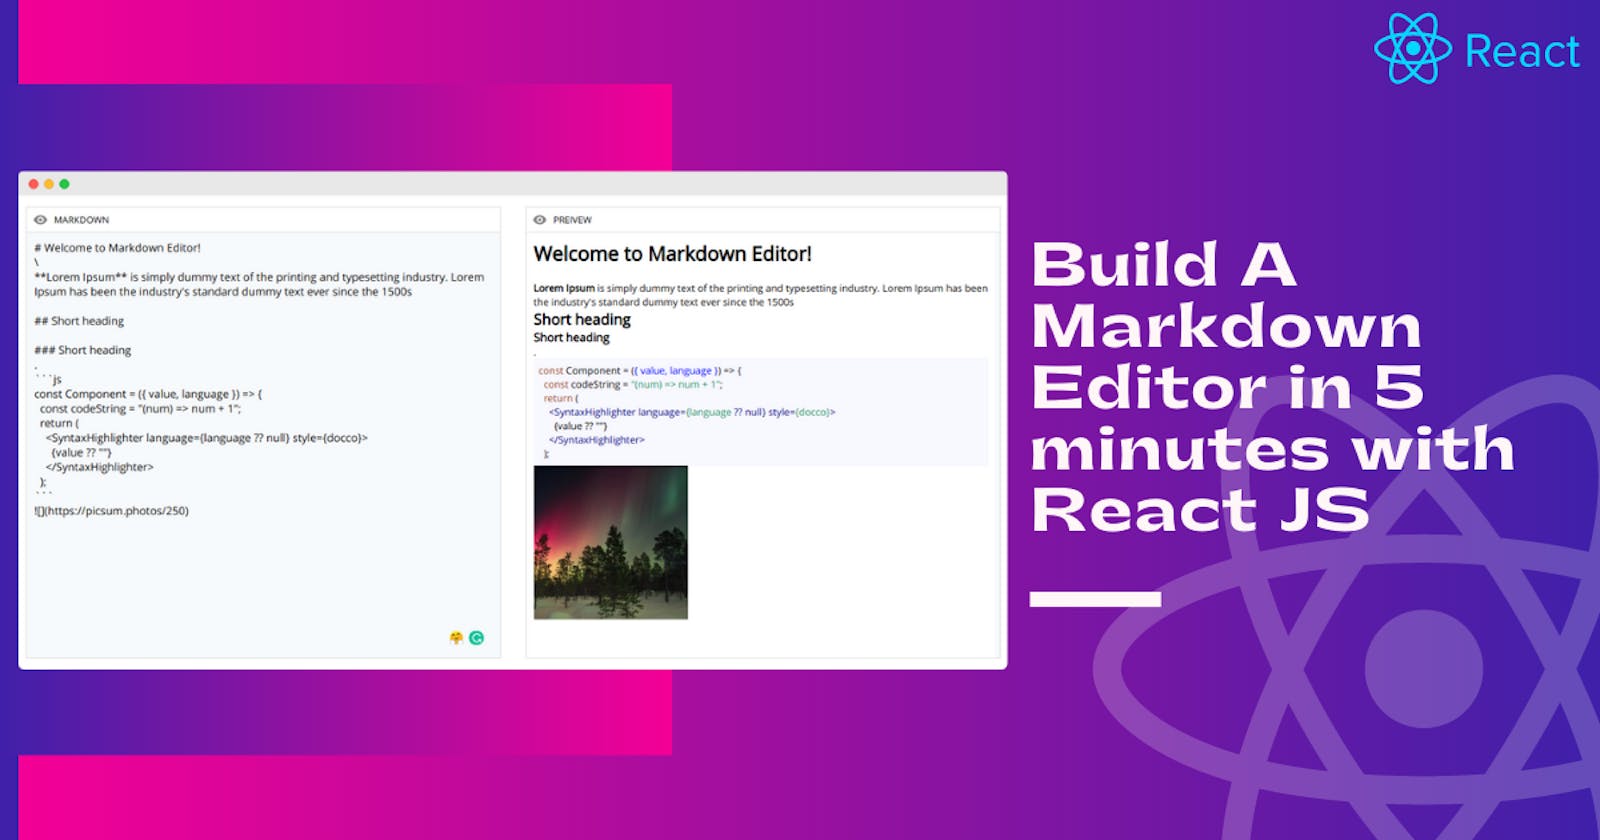 Lets Build Live Markdown Editor in 5 minutes with React JS. ⚡🚀